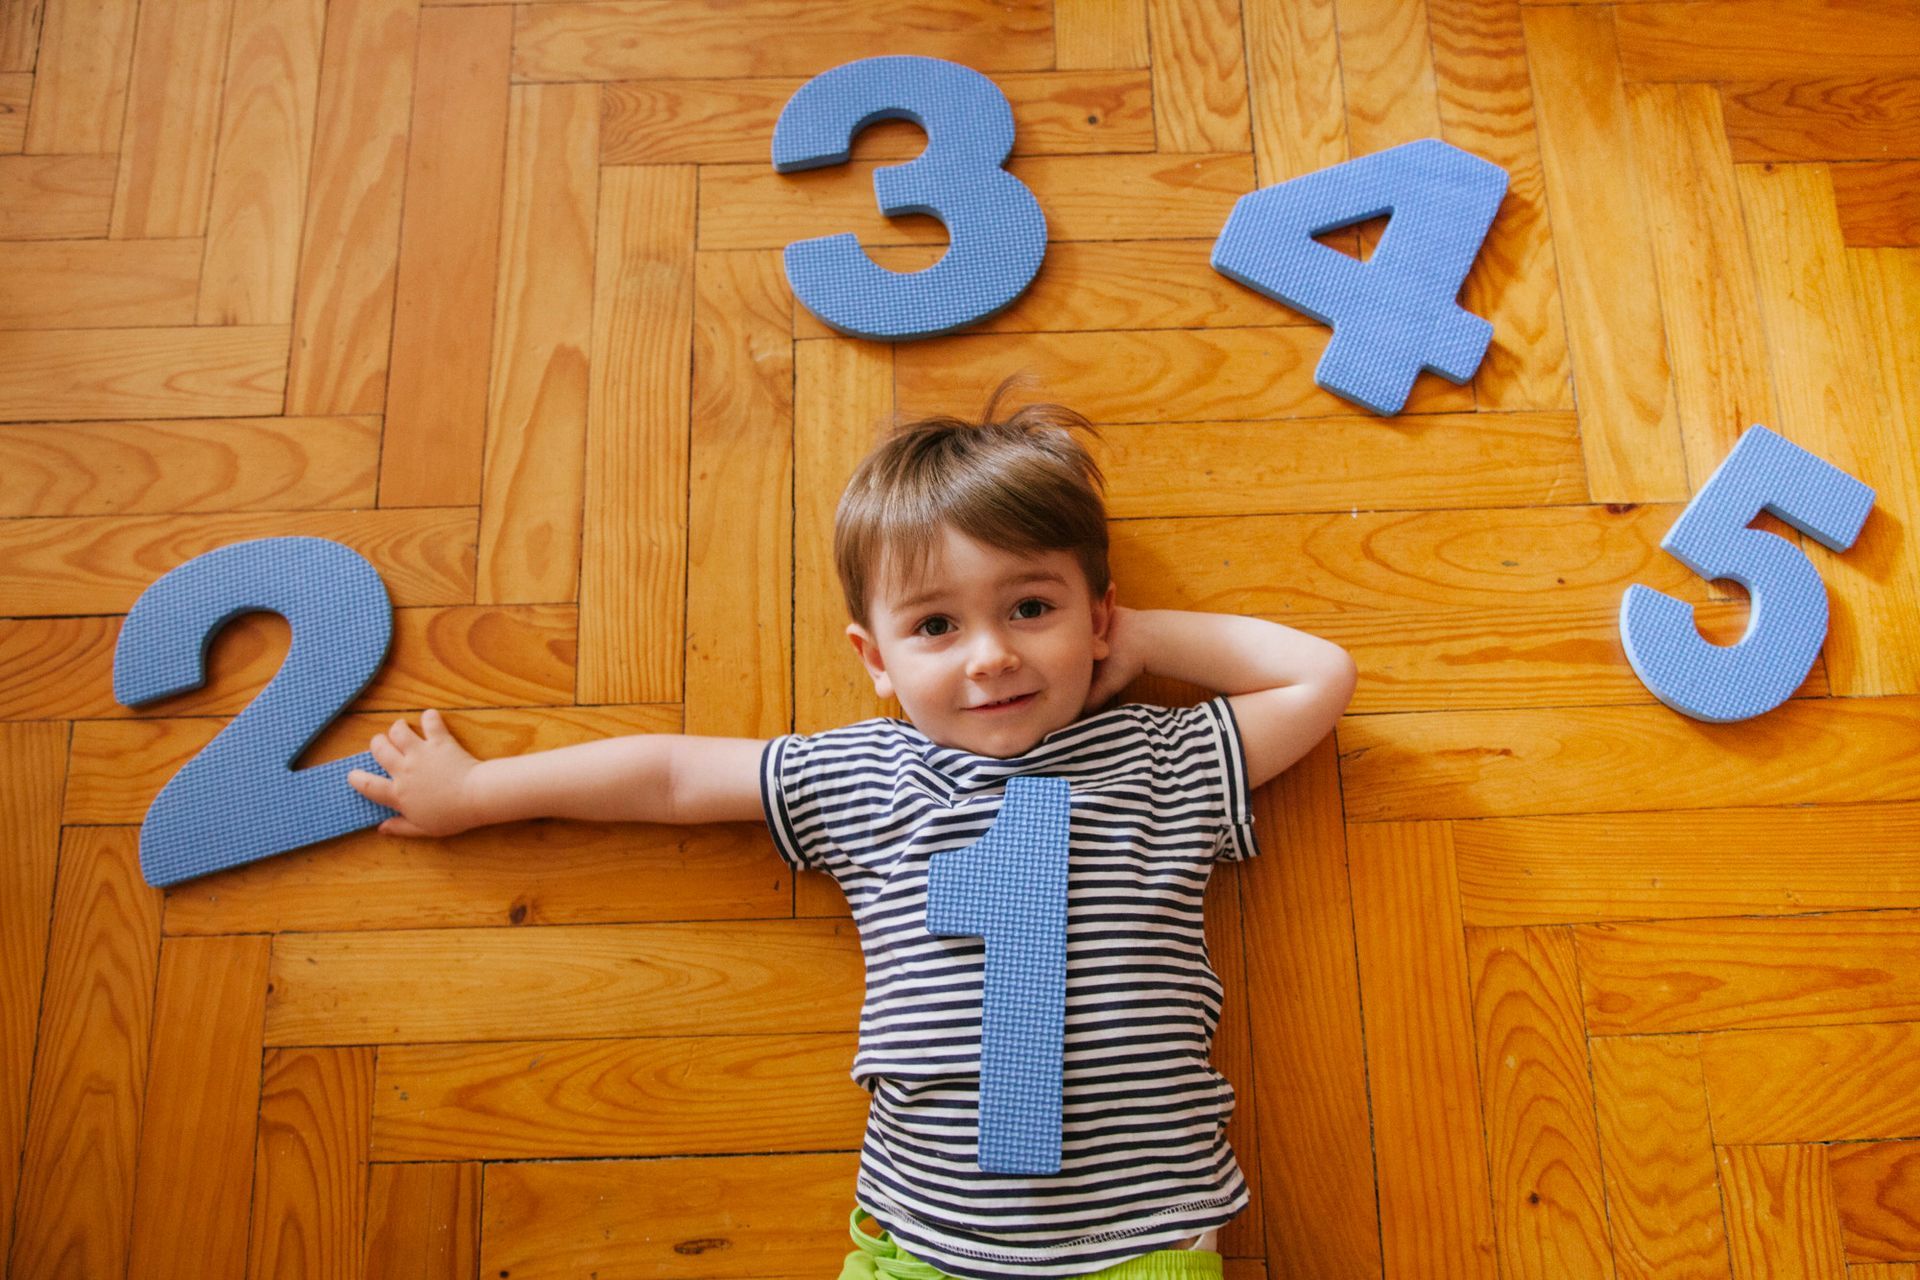 A young boy is laying on the floor surrounded by numbers.